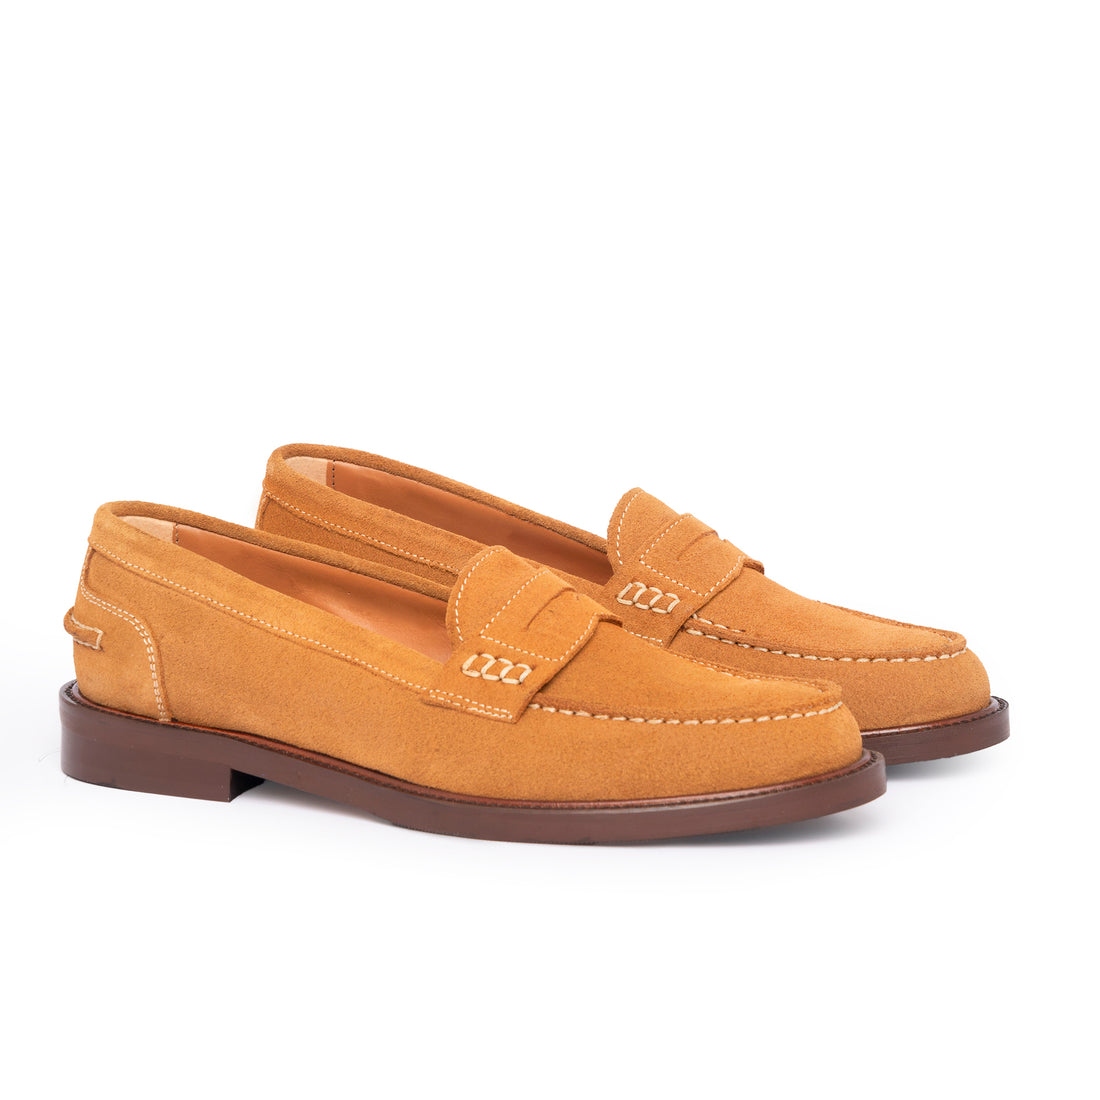 Women's moccasins in leather suede